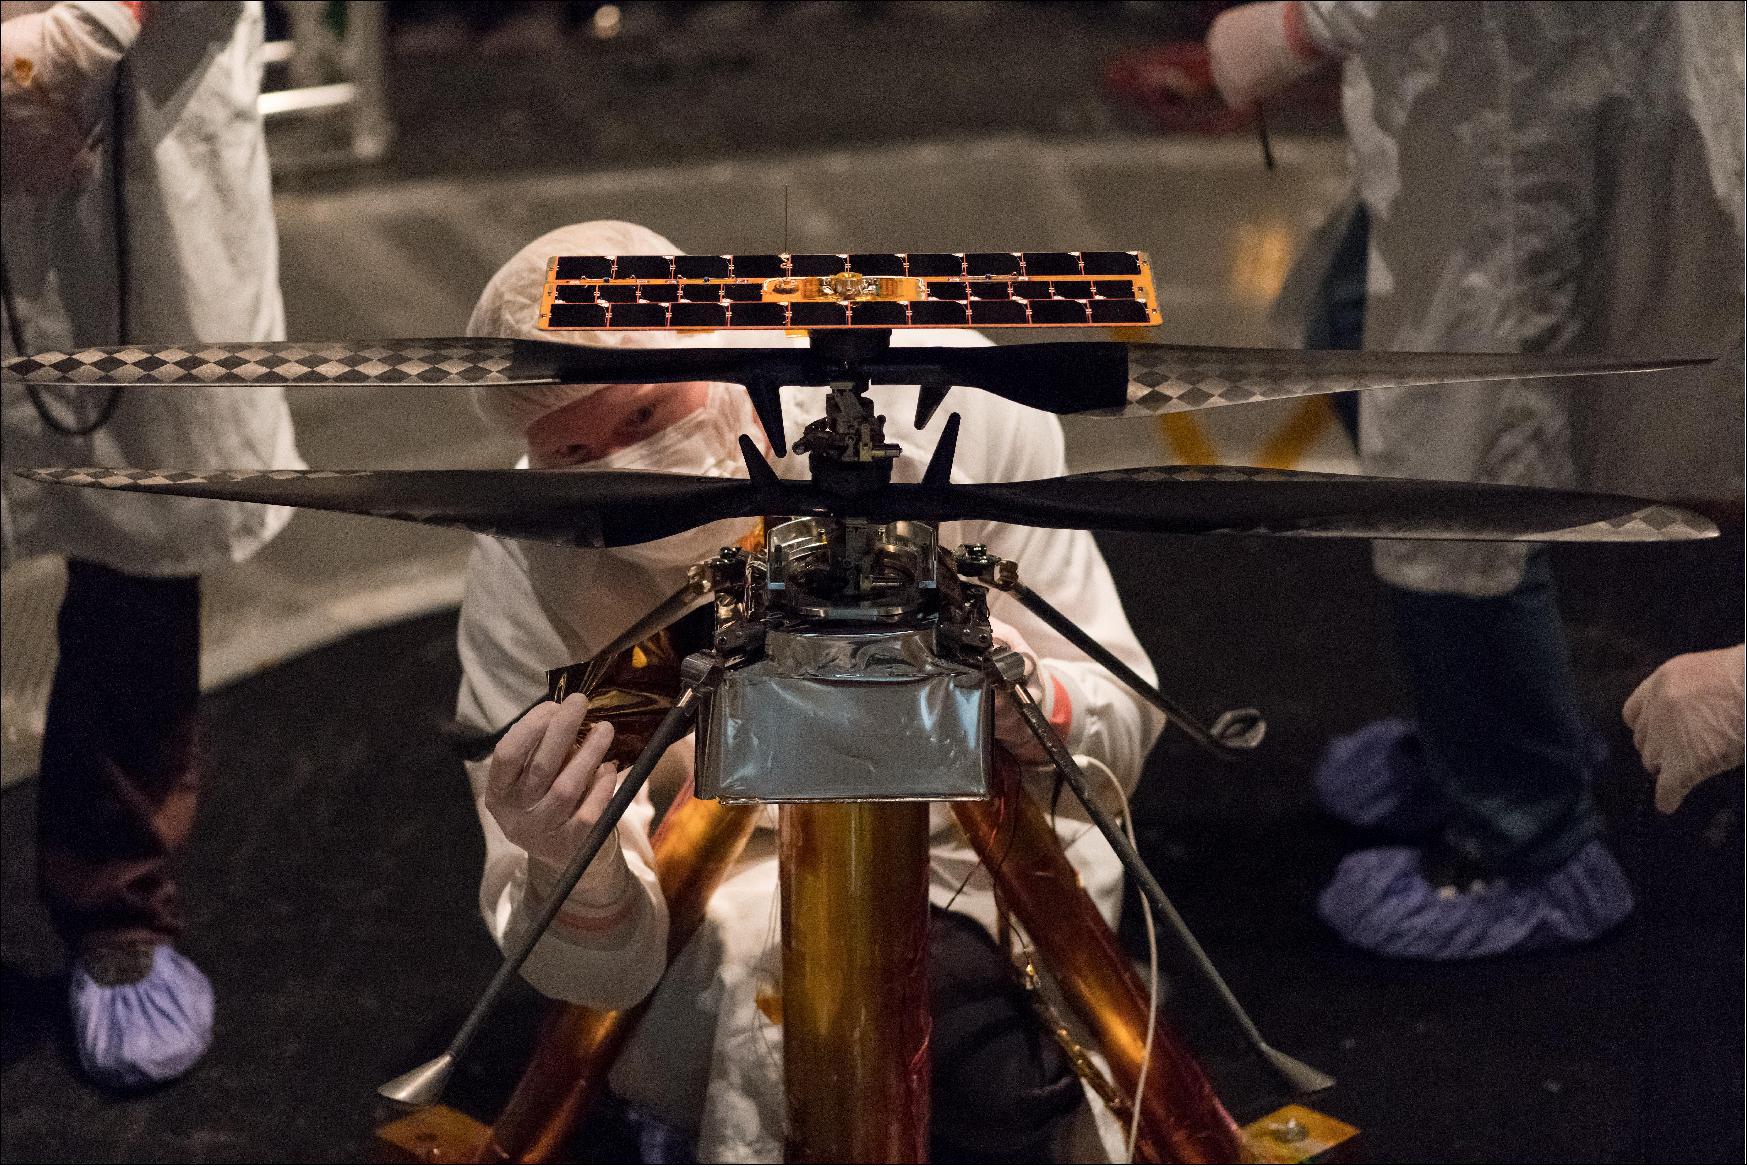 Figure 13: Members of the NASA Mars Helicopter team attach a thermal film to the exterior of the flight model of the Mars Helicopter. The image was taken on Feb. 1, 2019 inside the Space Simulator, a 7.62-meter-wide vacuum chamber at NASA's Jet Propulsion Laboratory in Pasadena, California (image credit: NASA/JPL-Caltech)